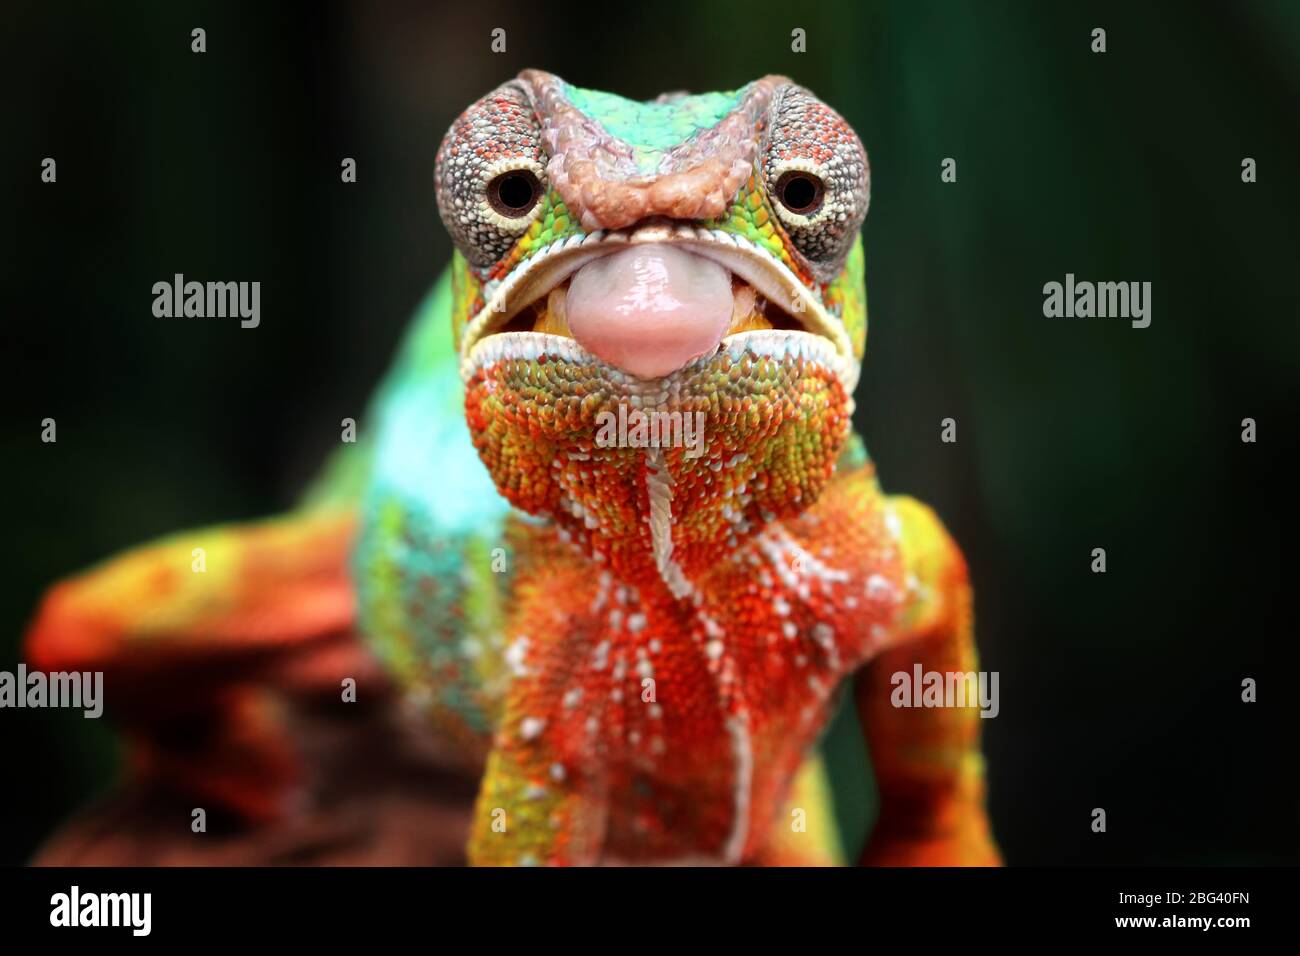 Panther chameleon ready to strike, Indonesia Stock Photo